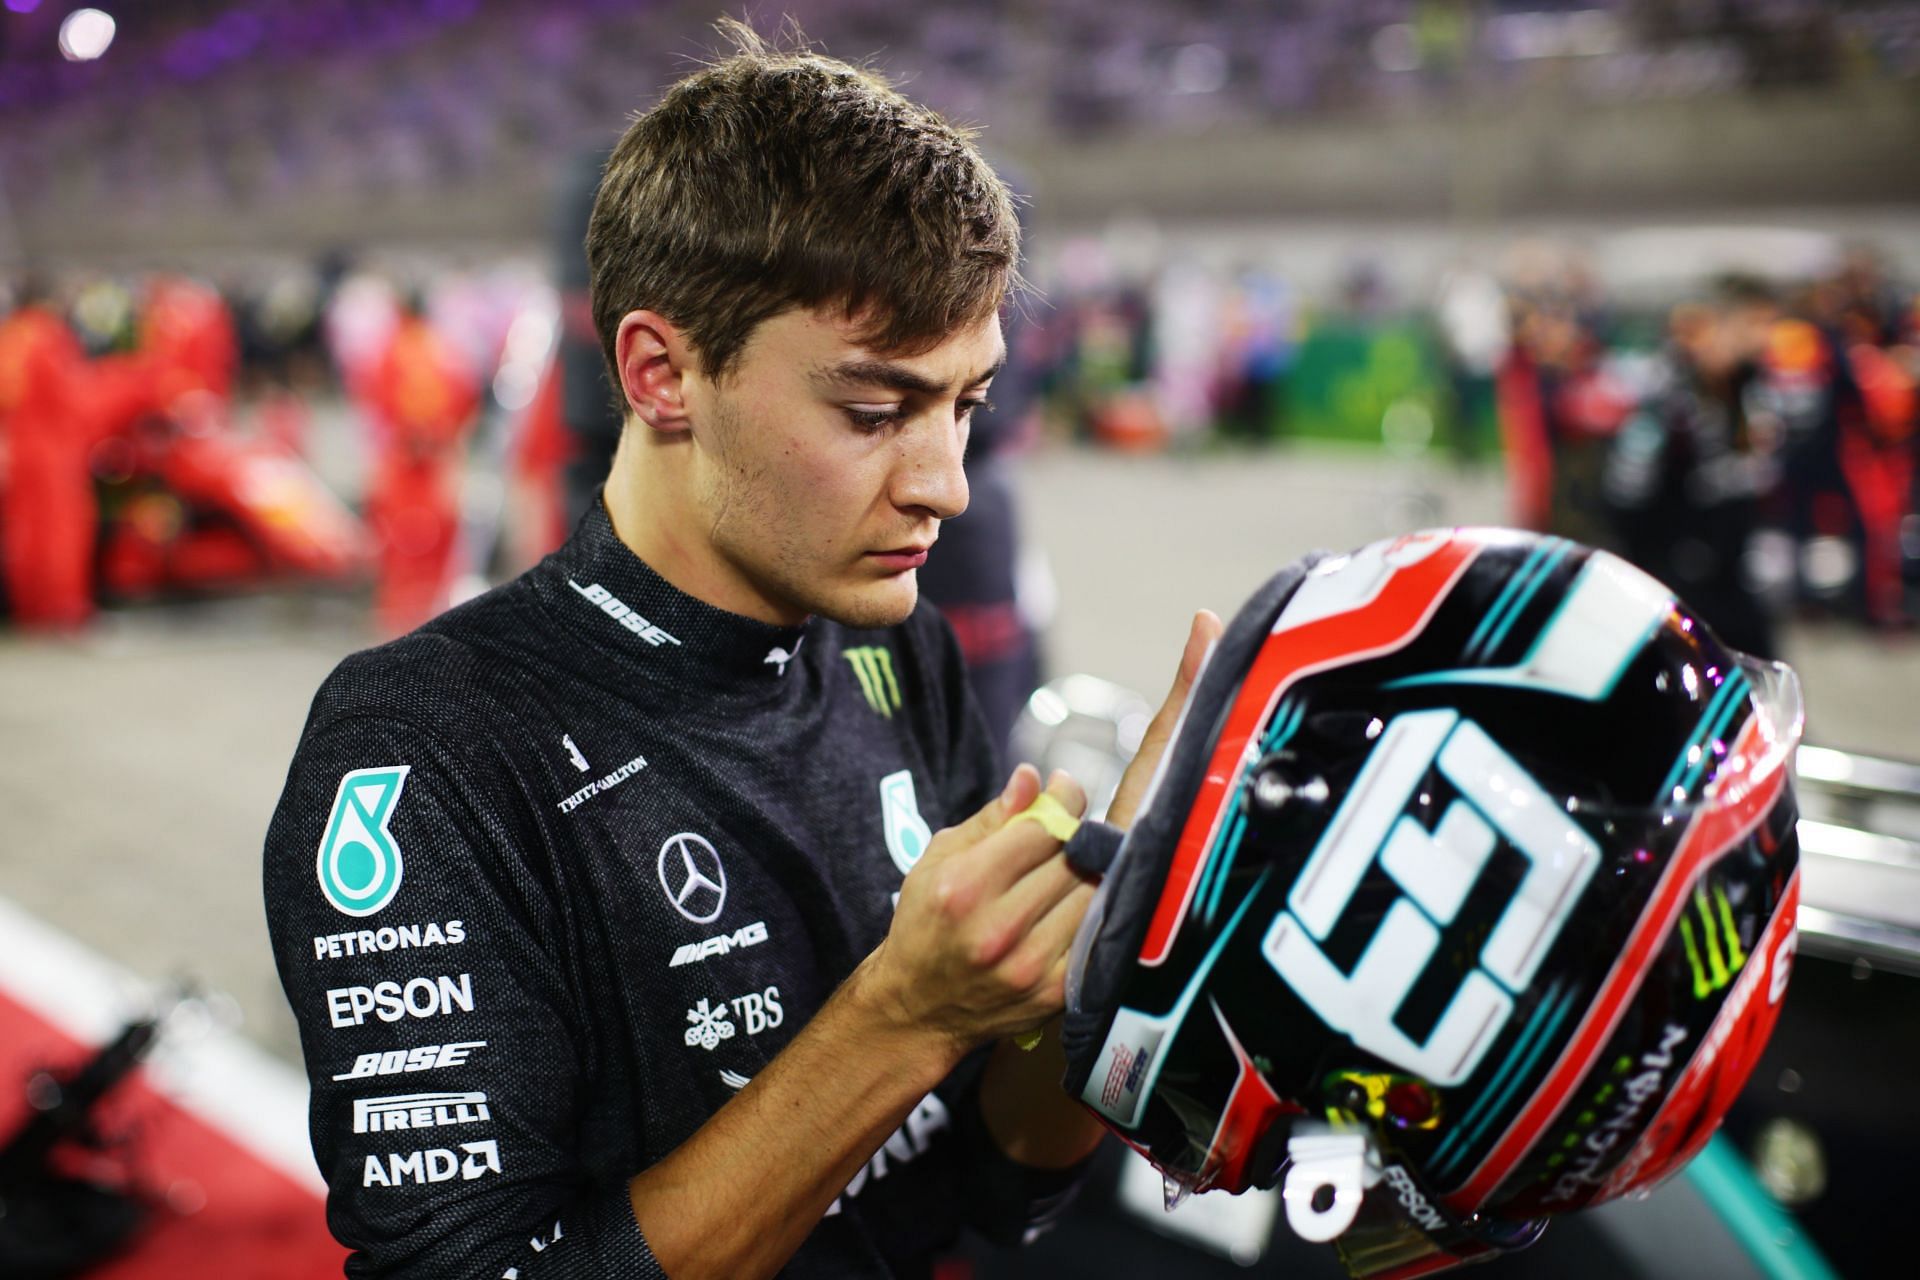 George Russell in Mercedes overalls at the Sakhir GP 2020 (Photo by Peter Fox/Getty Images)